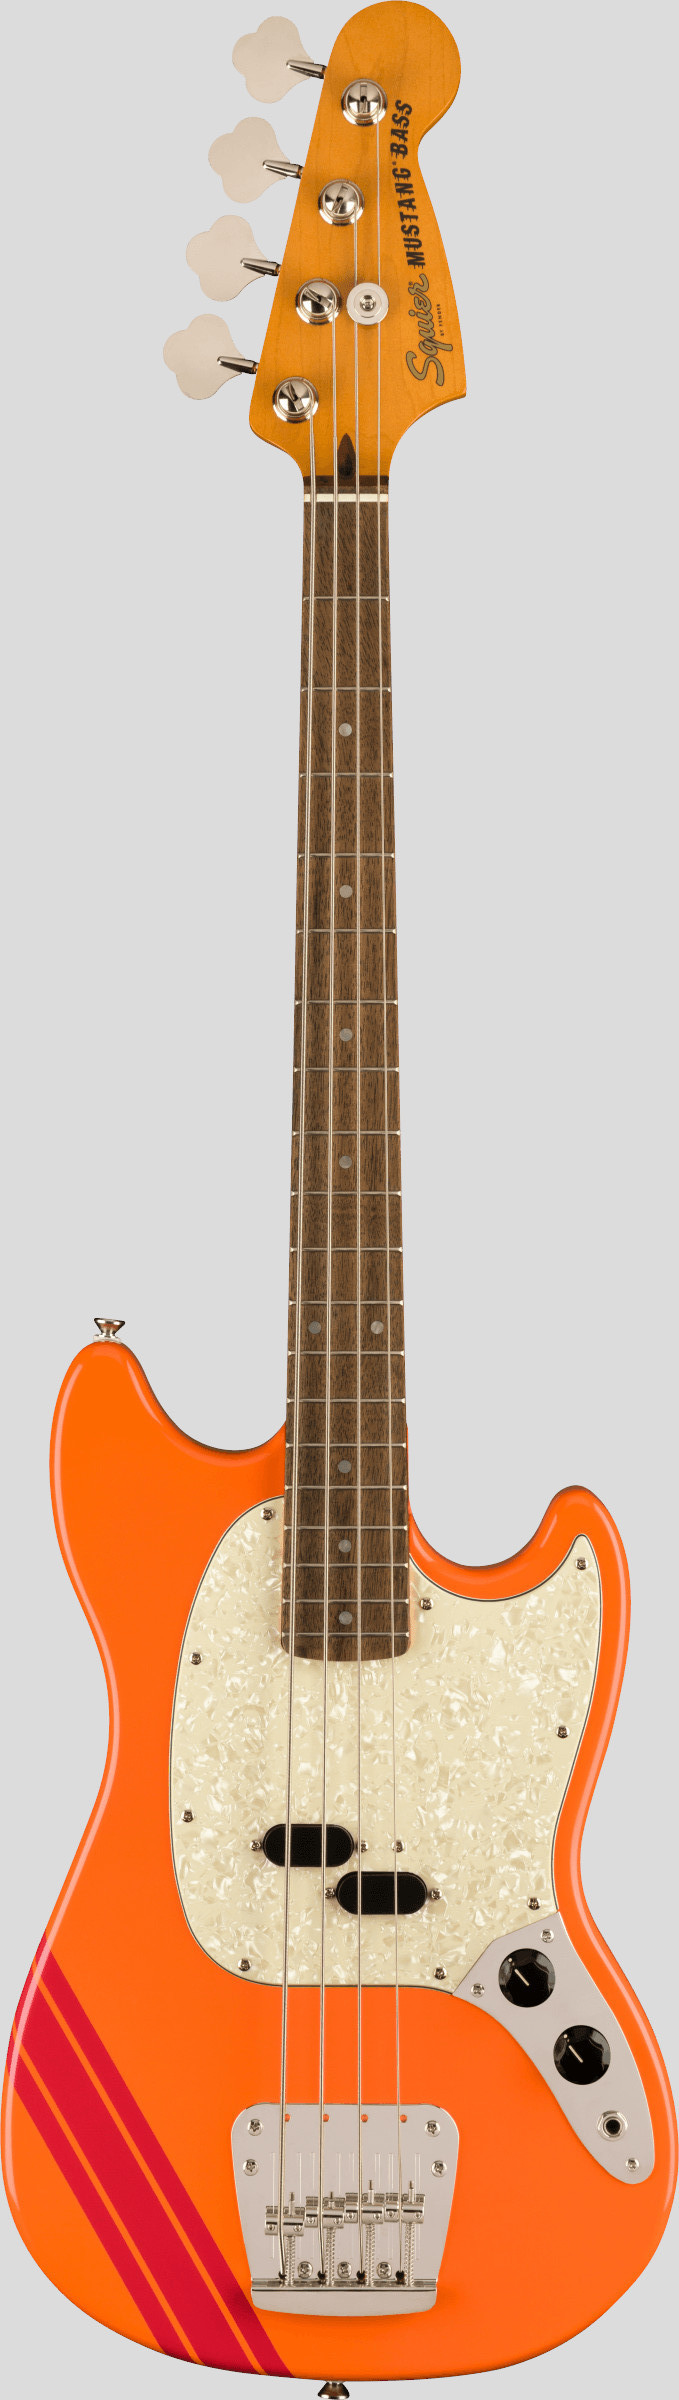 Squier by Fender Limited Edition Classic Vibe 60 Competition Mustang Bass Capri Orange 1